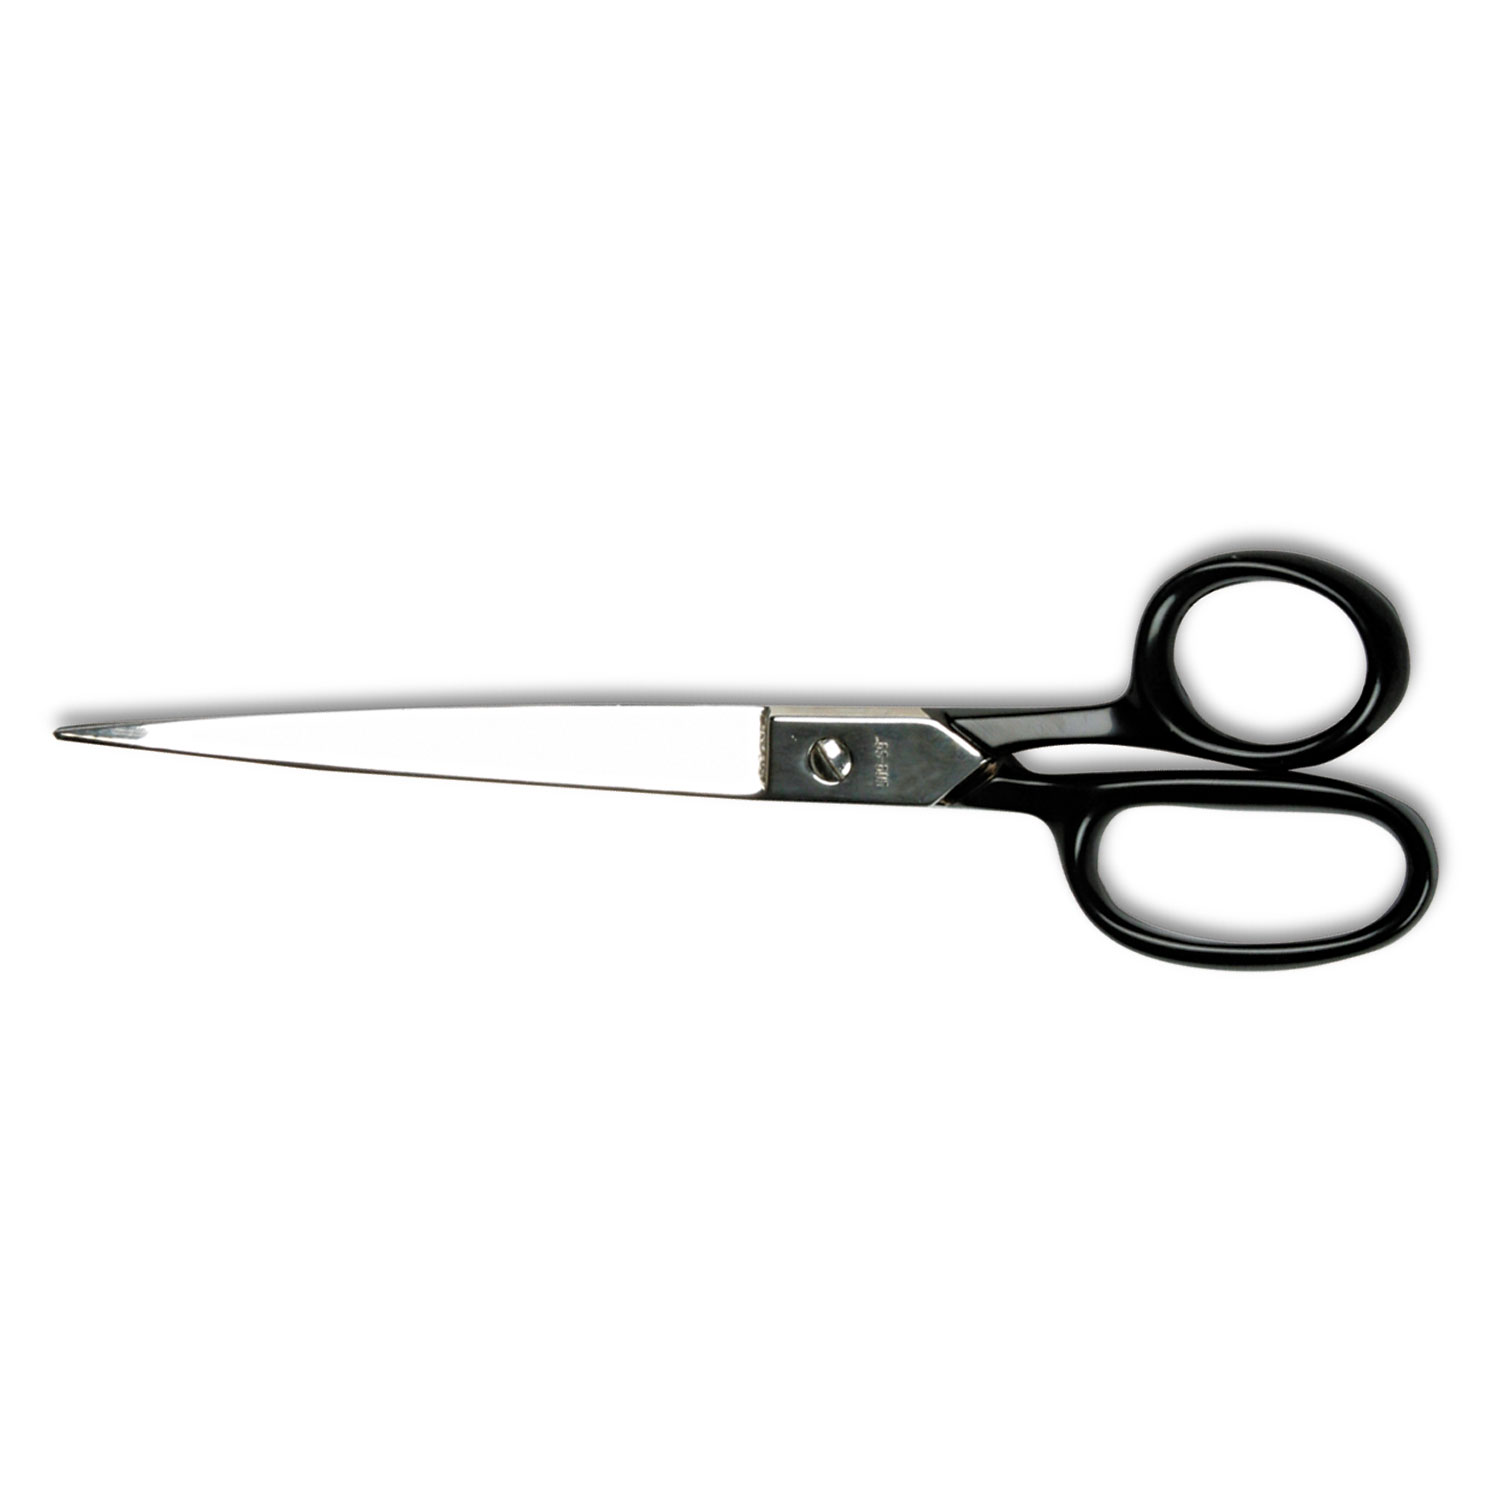  Clauss 10252 Hot Forged Carbon Steel Shears, 9 Long, 4.5 Cut Length, Black Straight Handle (ACM10252) 